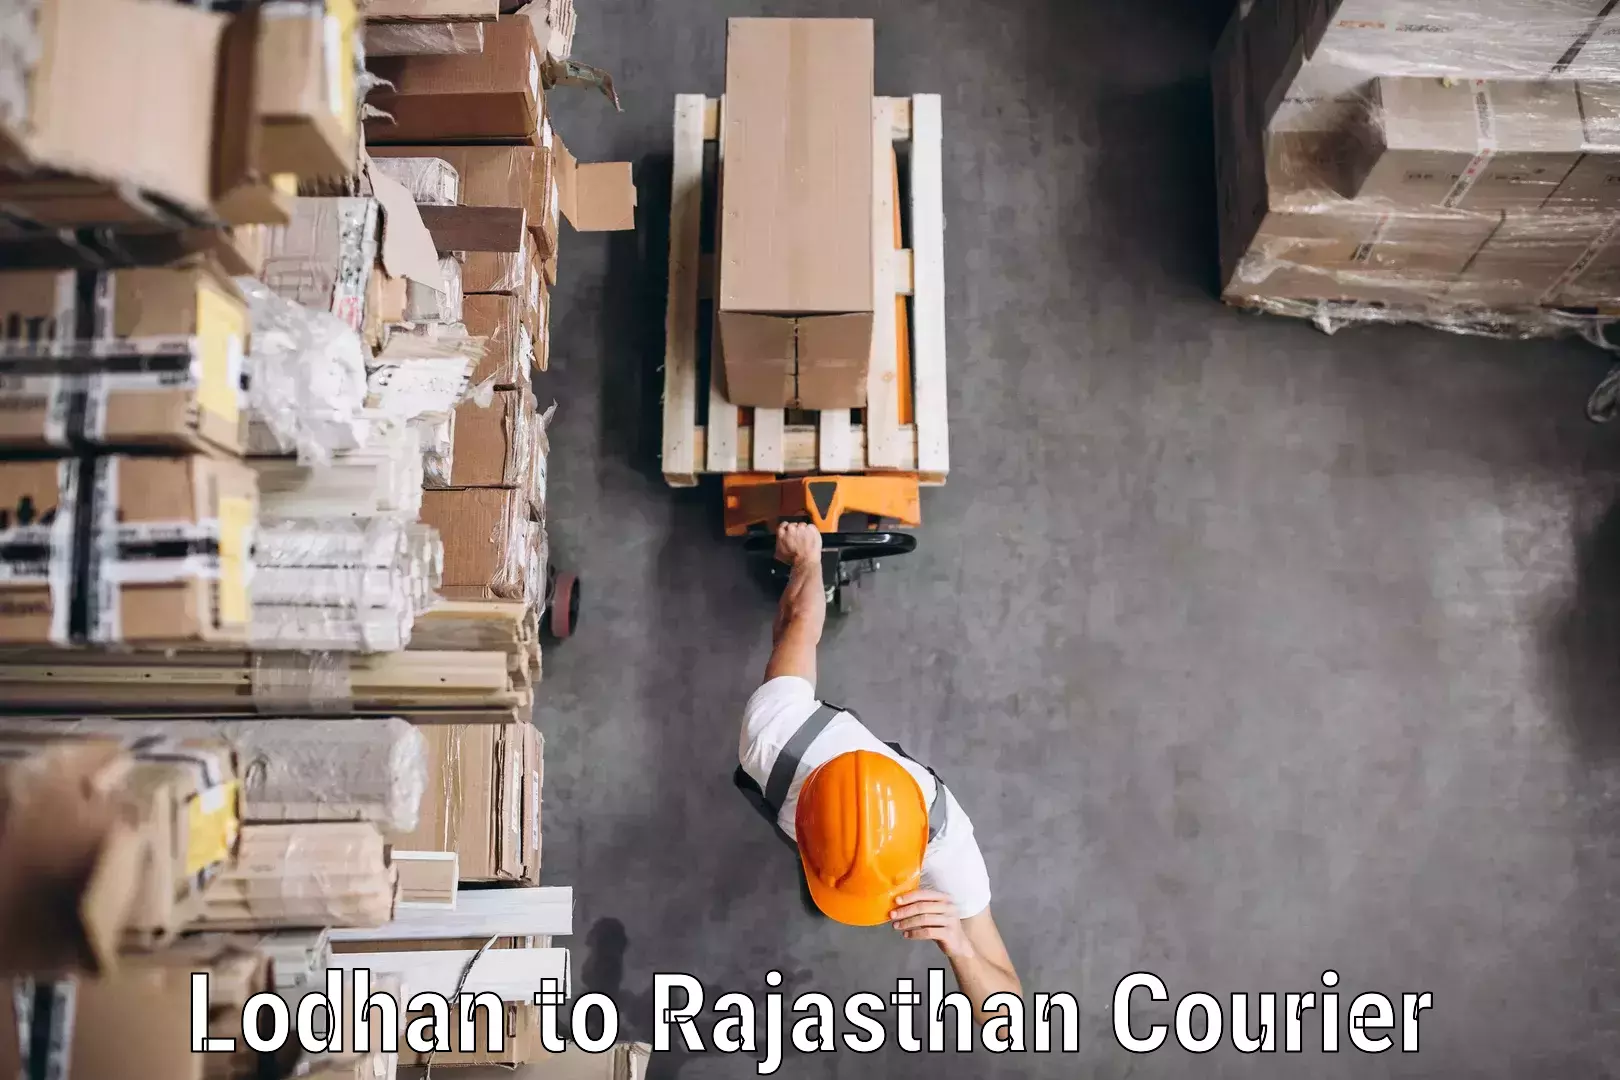 Advanced courier platforms Lodhan to Rajasthan